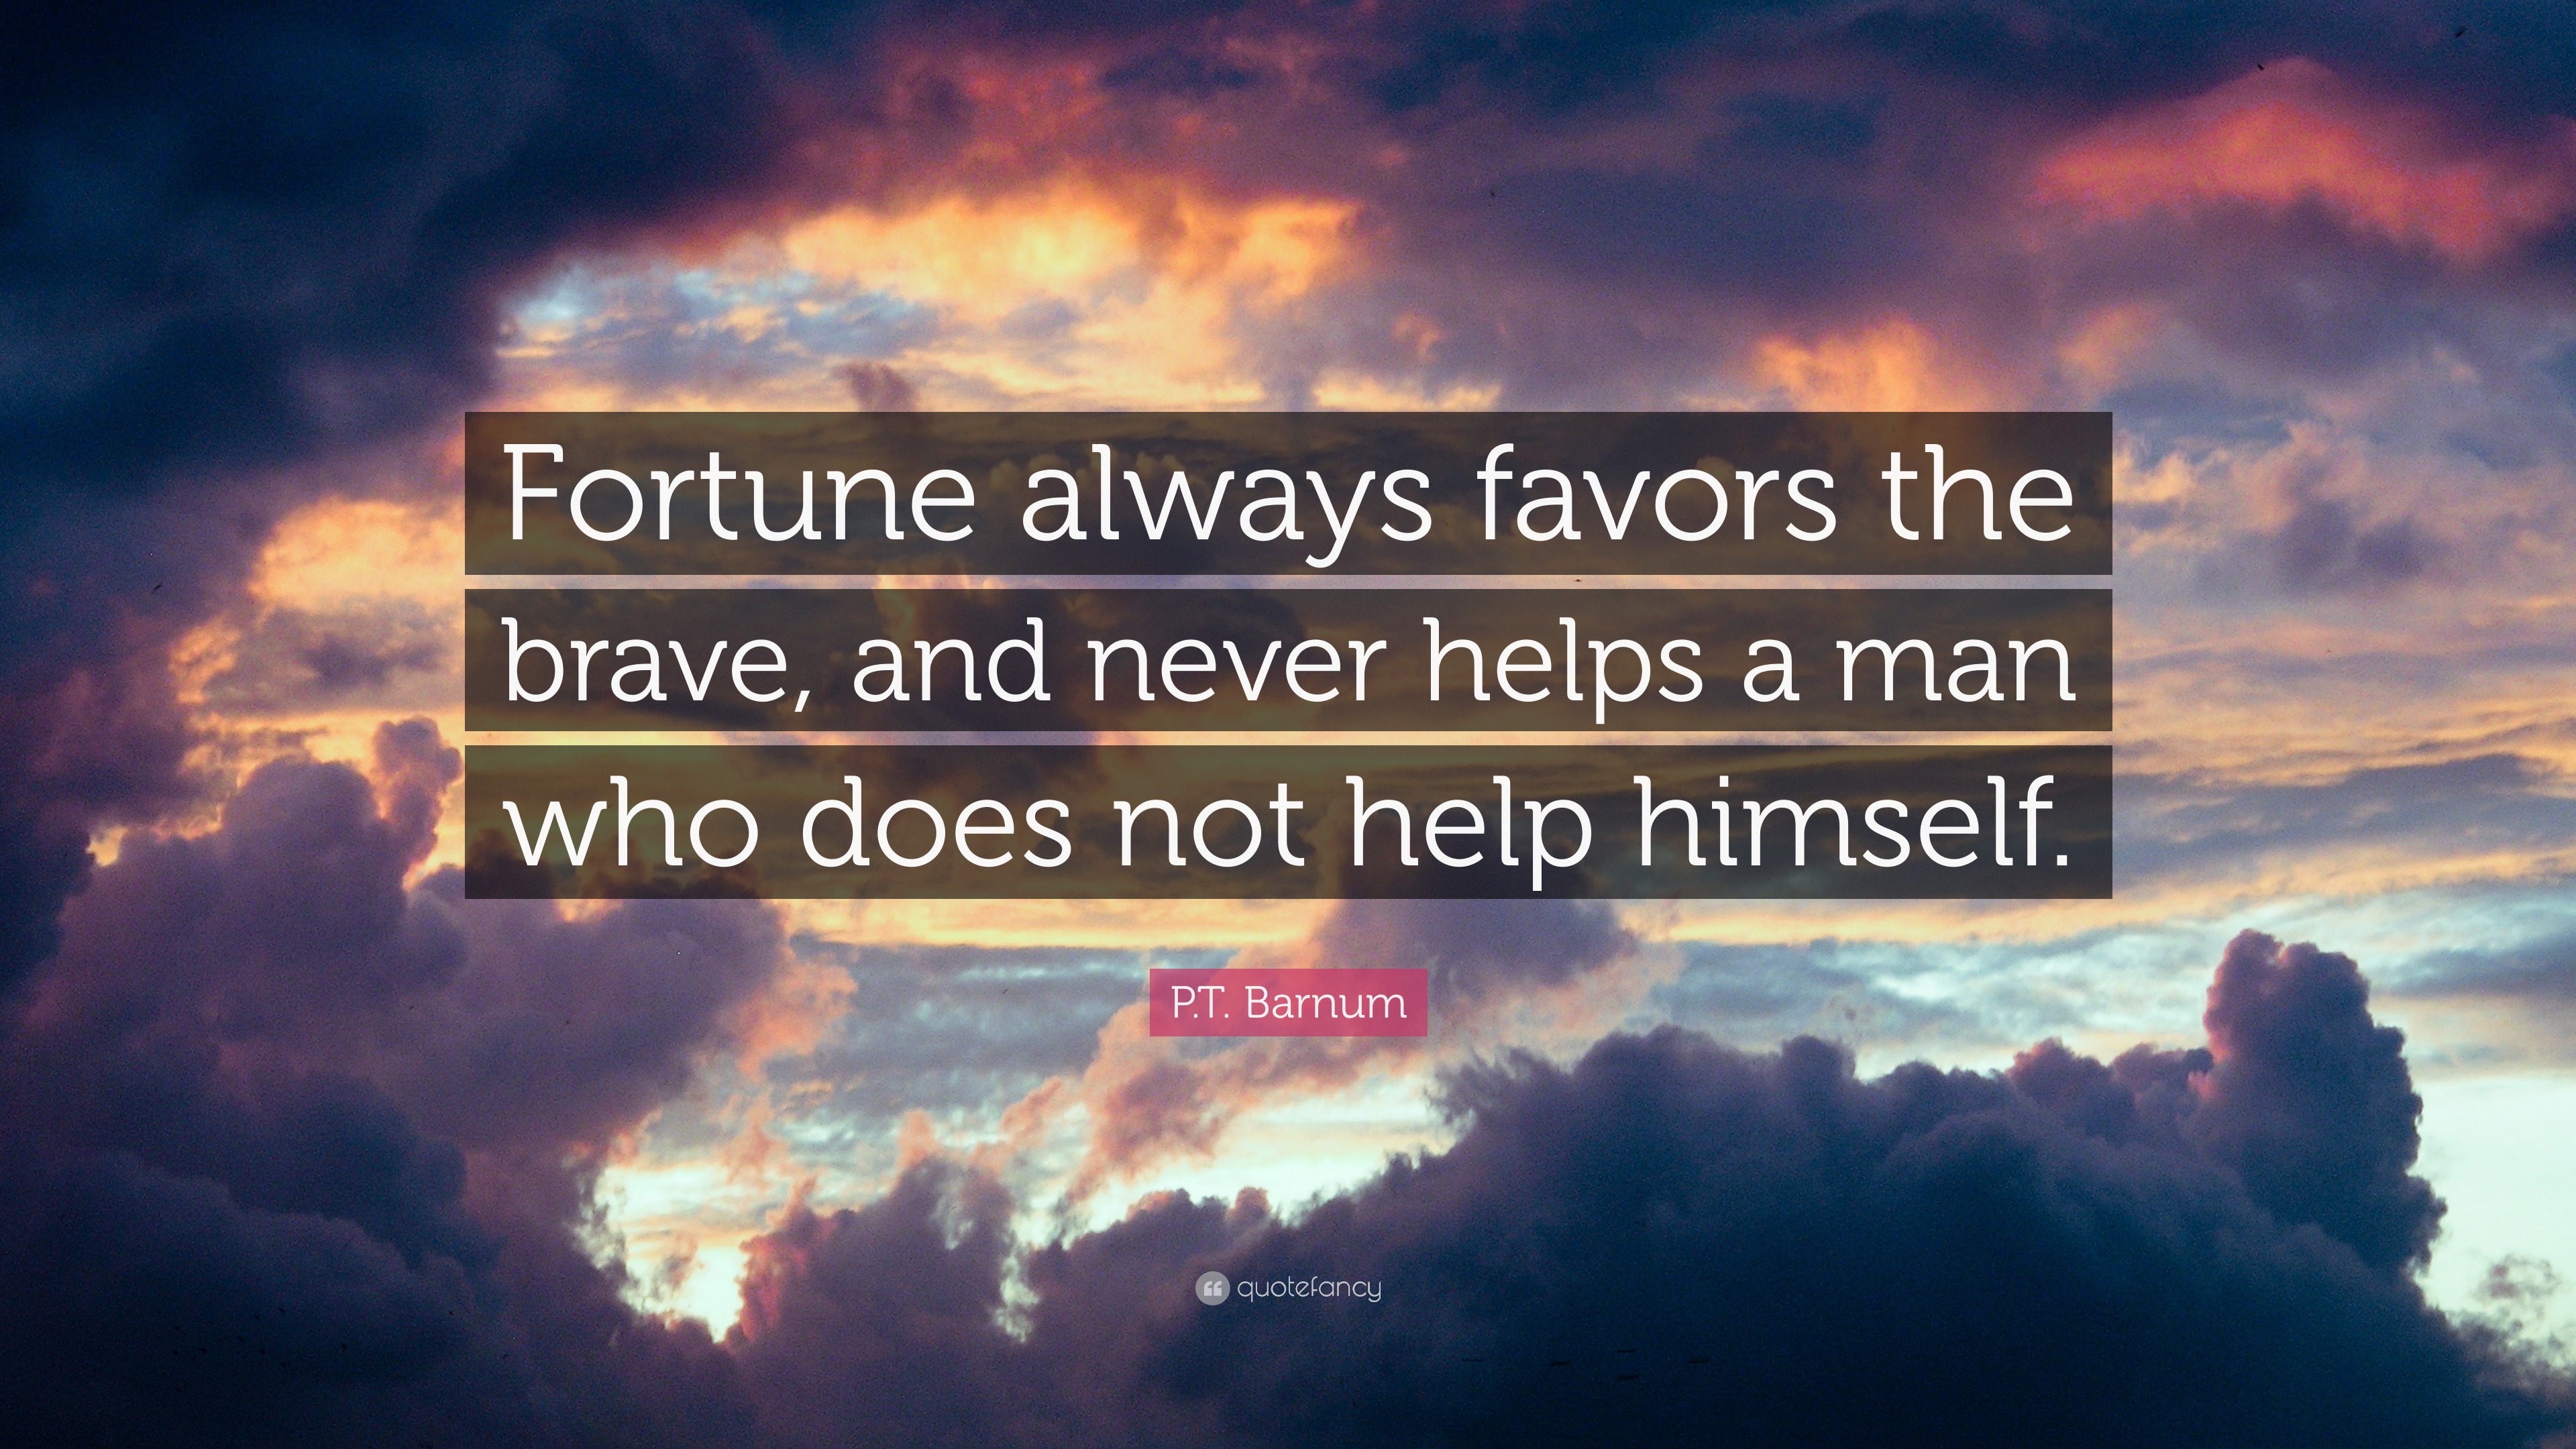 fortune favors the brave saying